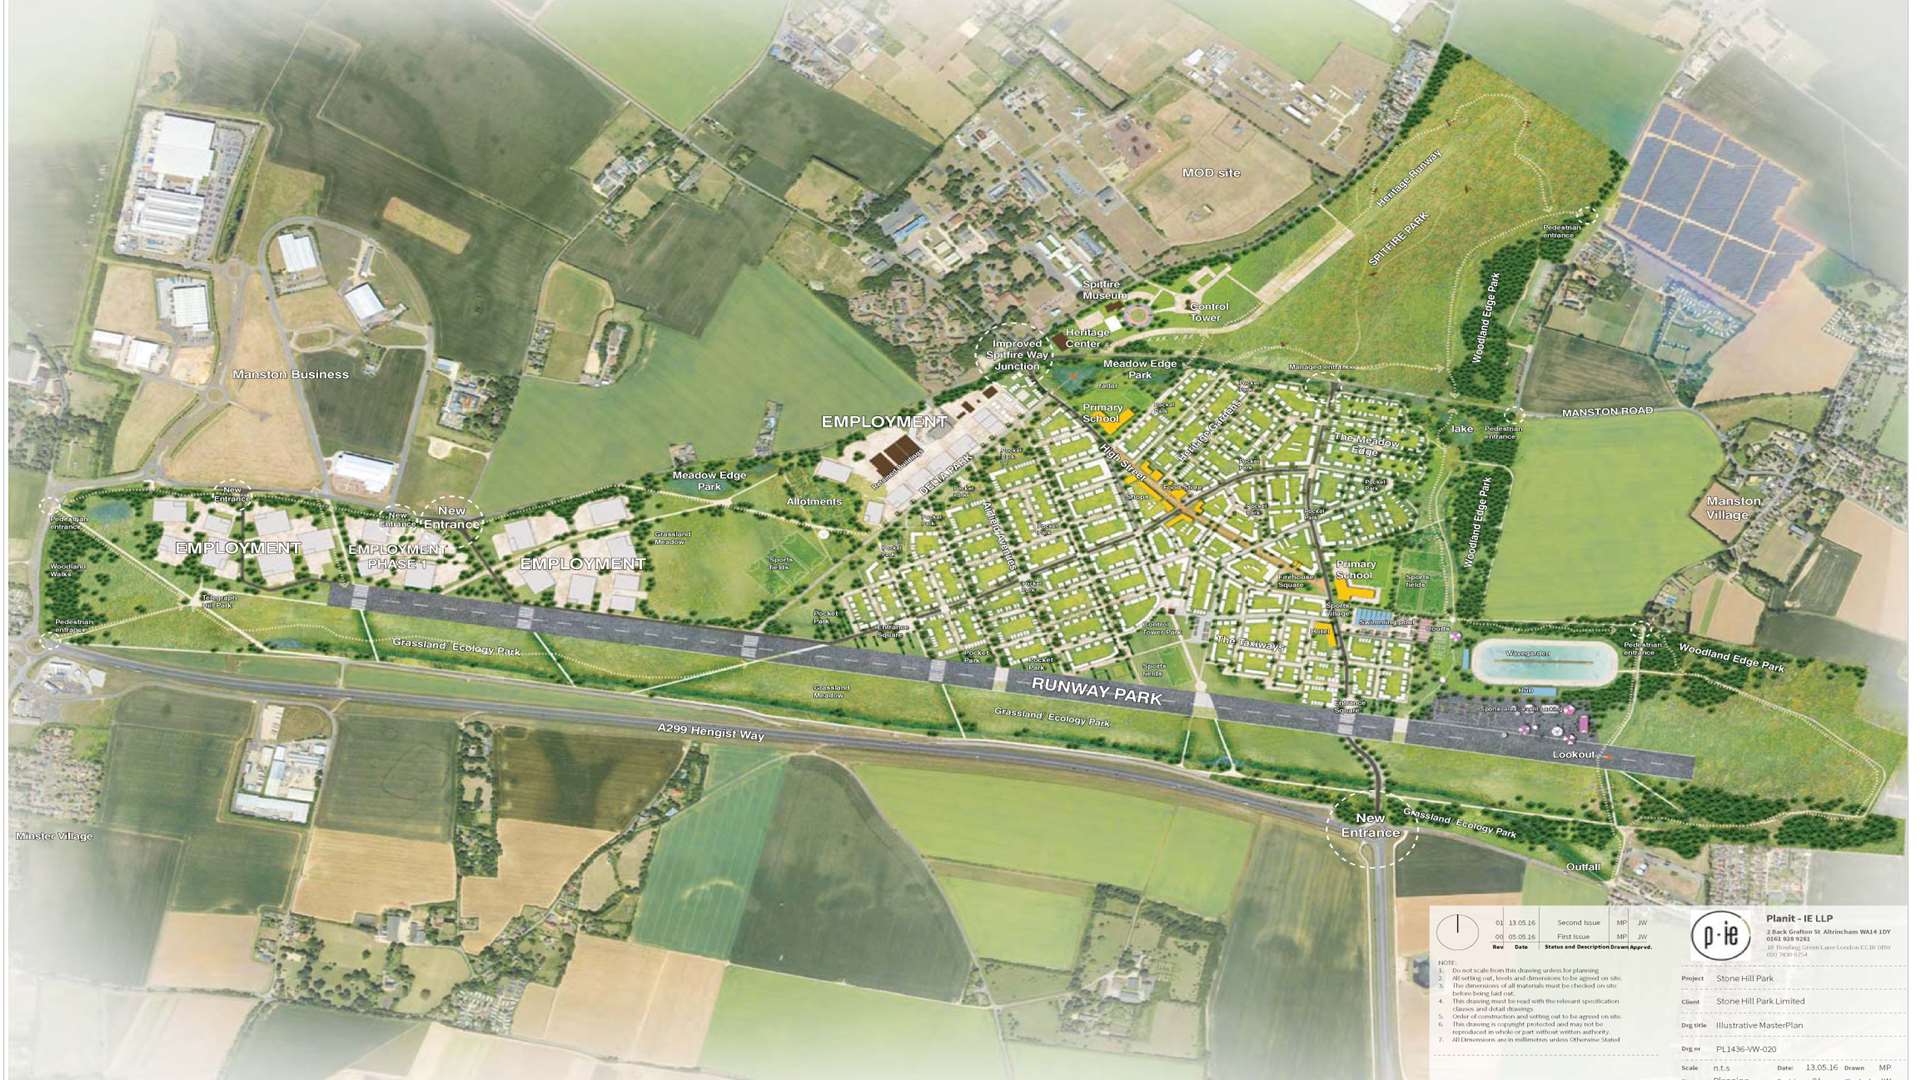 A planning application submitted for Stone Hill Park, the proposed development on the site of the former Manston airport